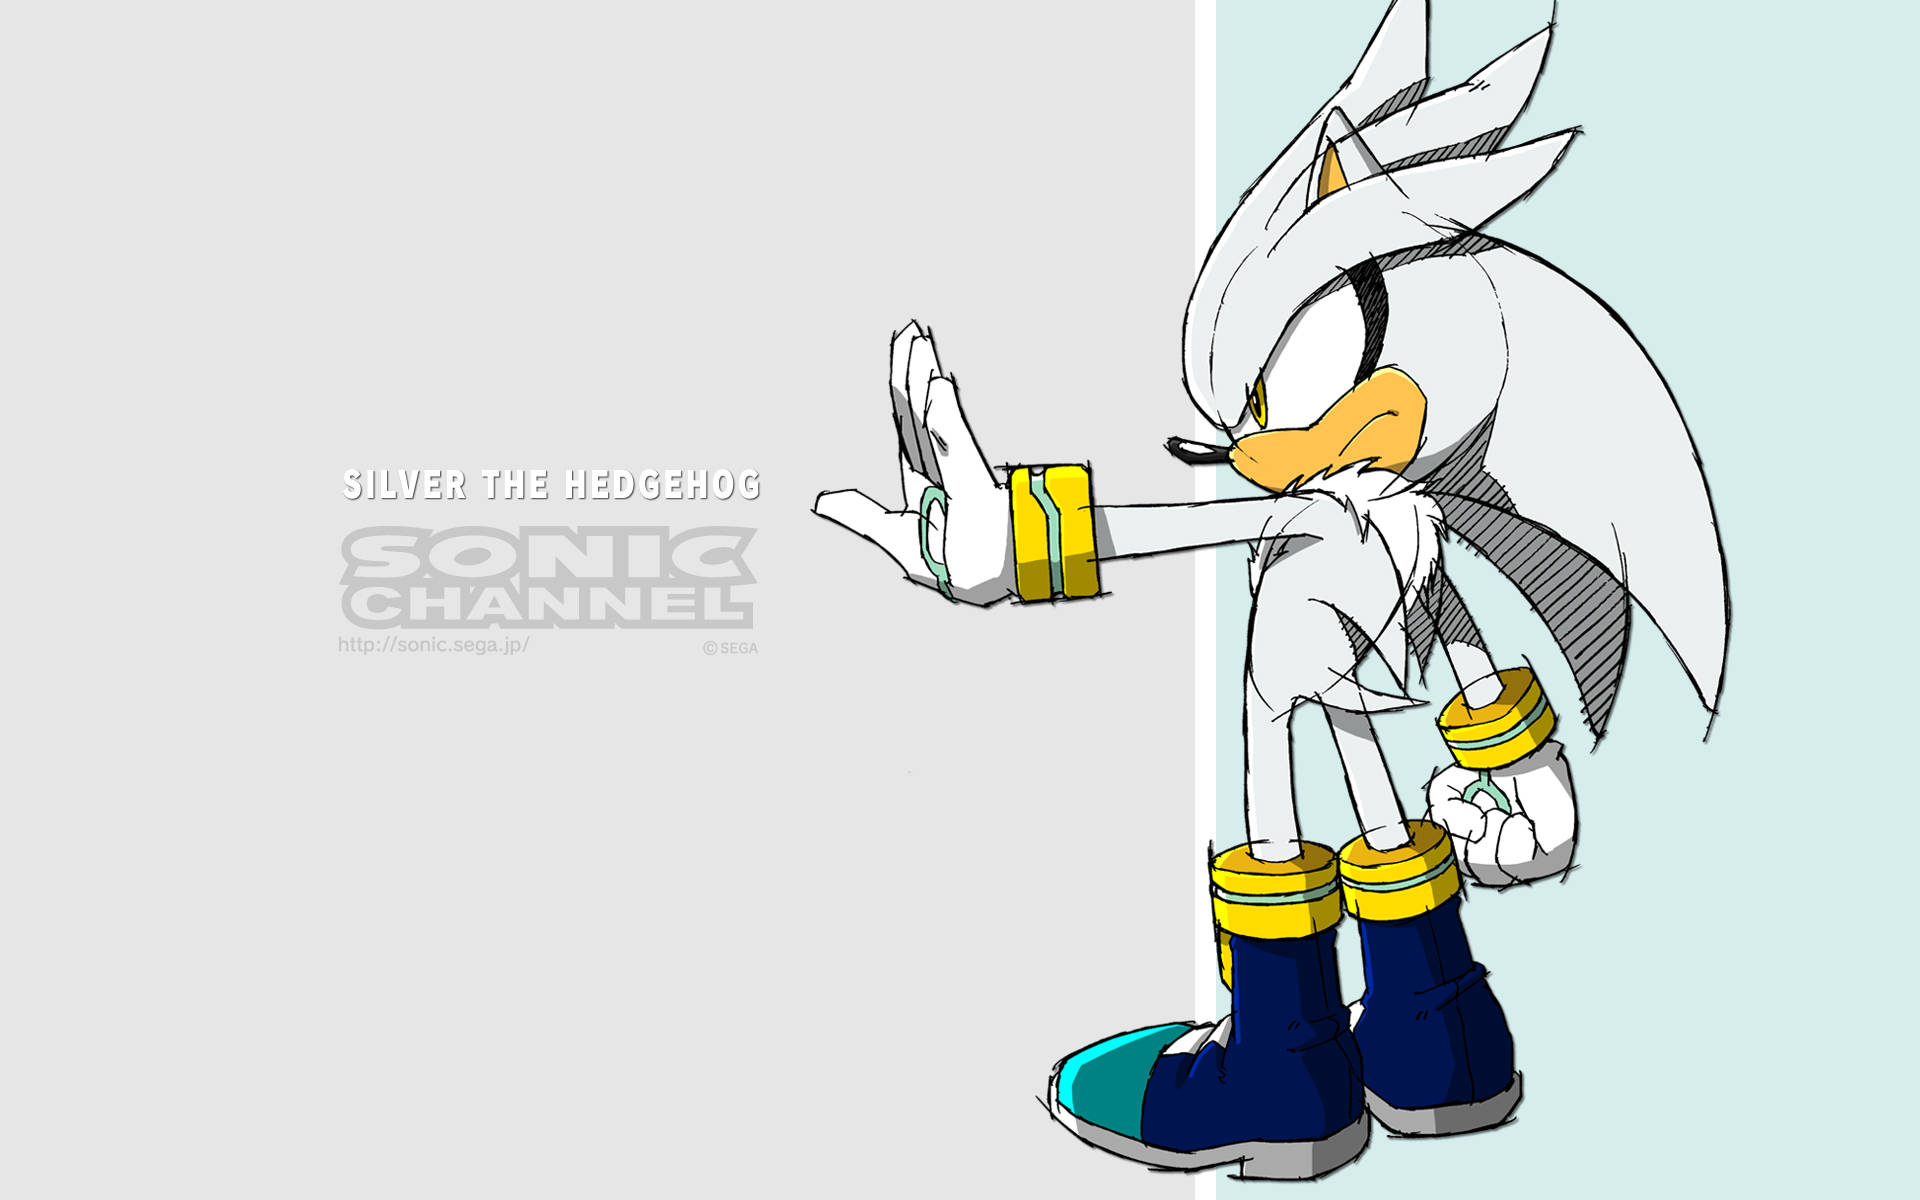 Top 999+ Silver The Hedgehog Wallpaper Full HD, 4K✅Free to Use